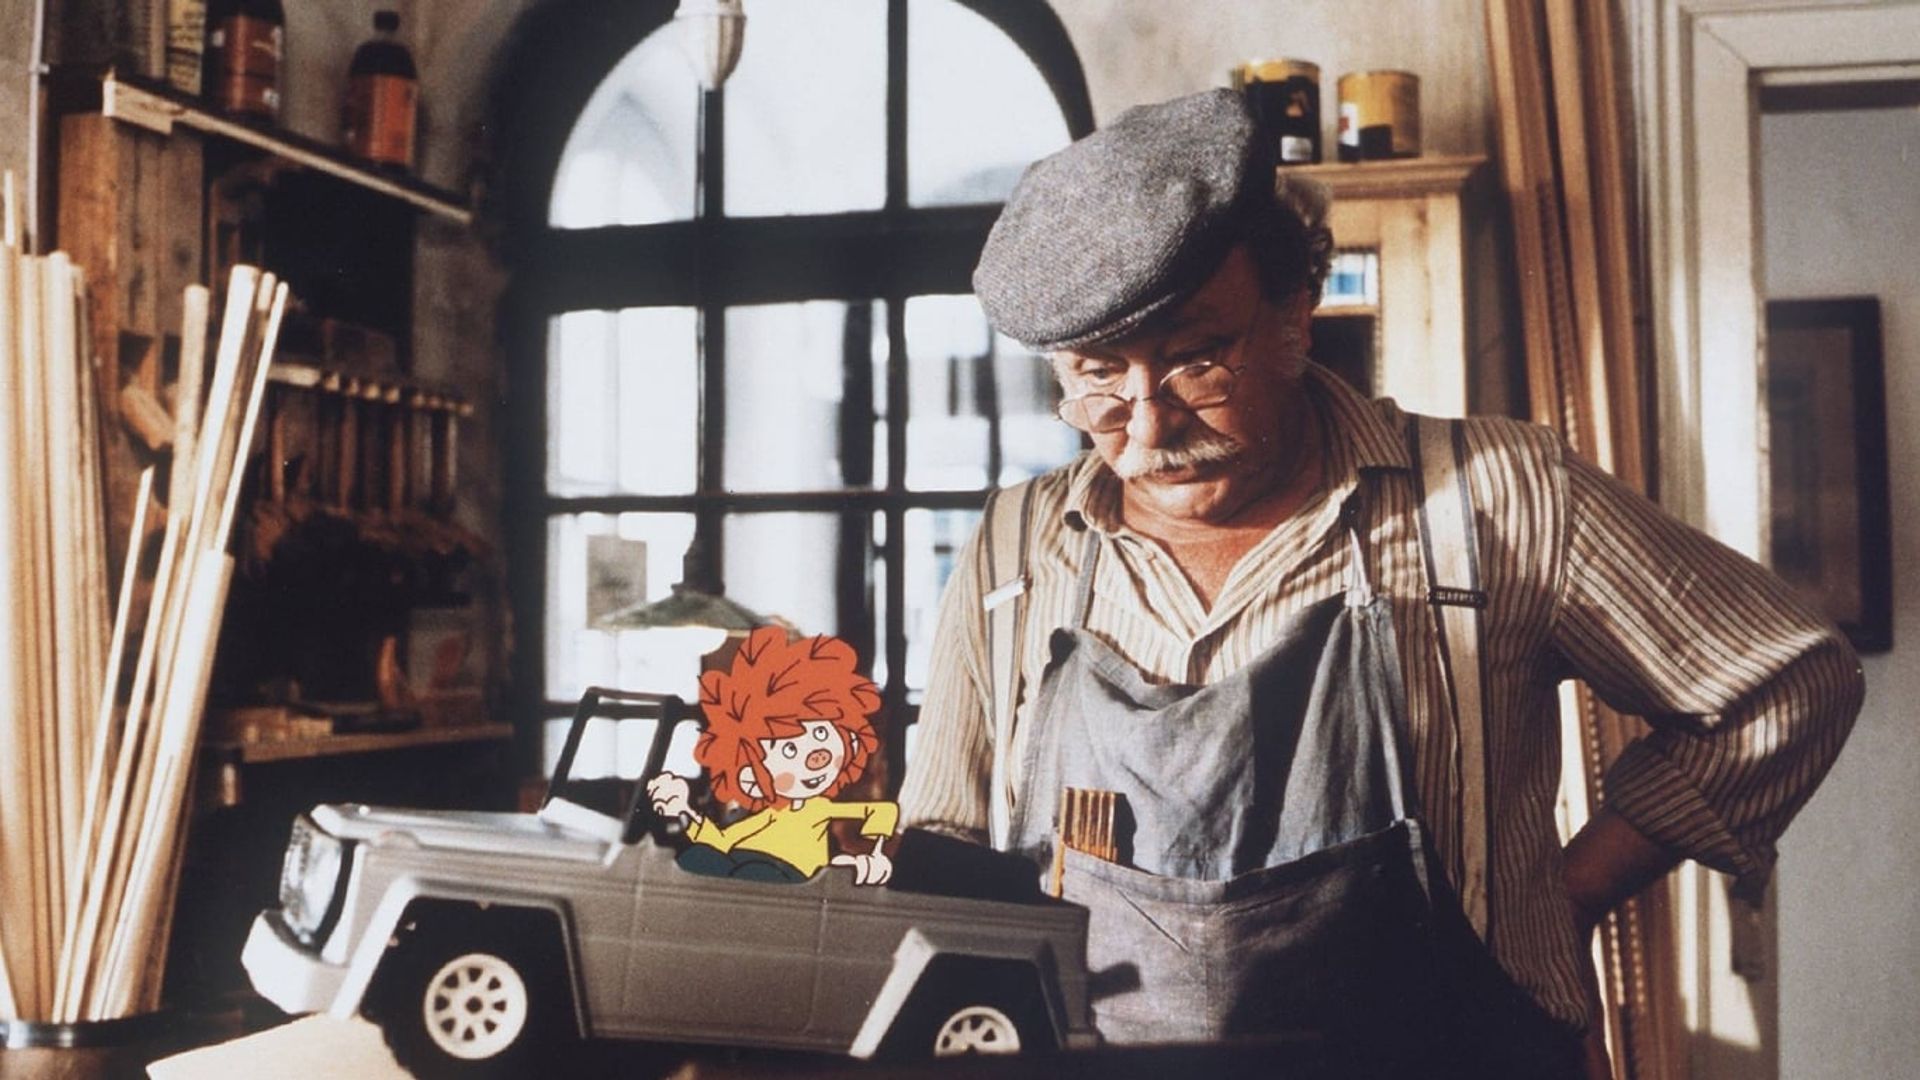 Master Eder and His Pumuckl background